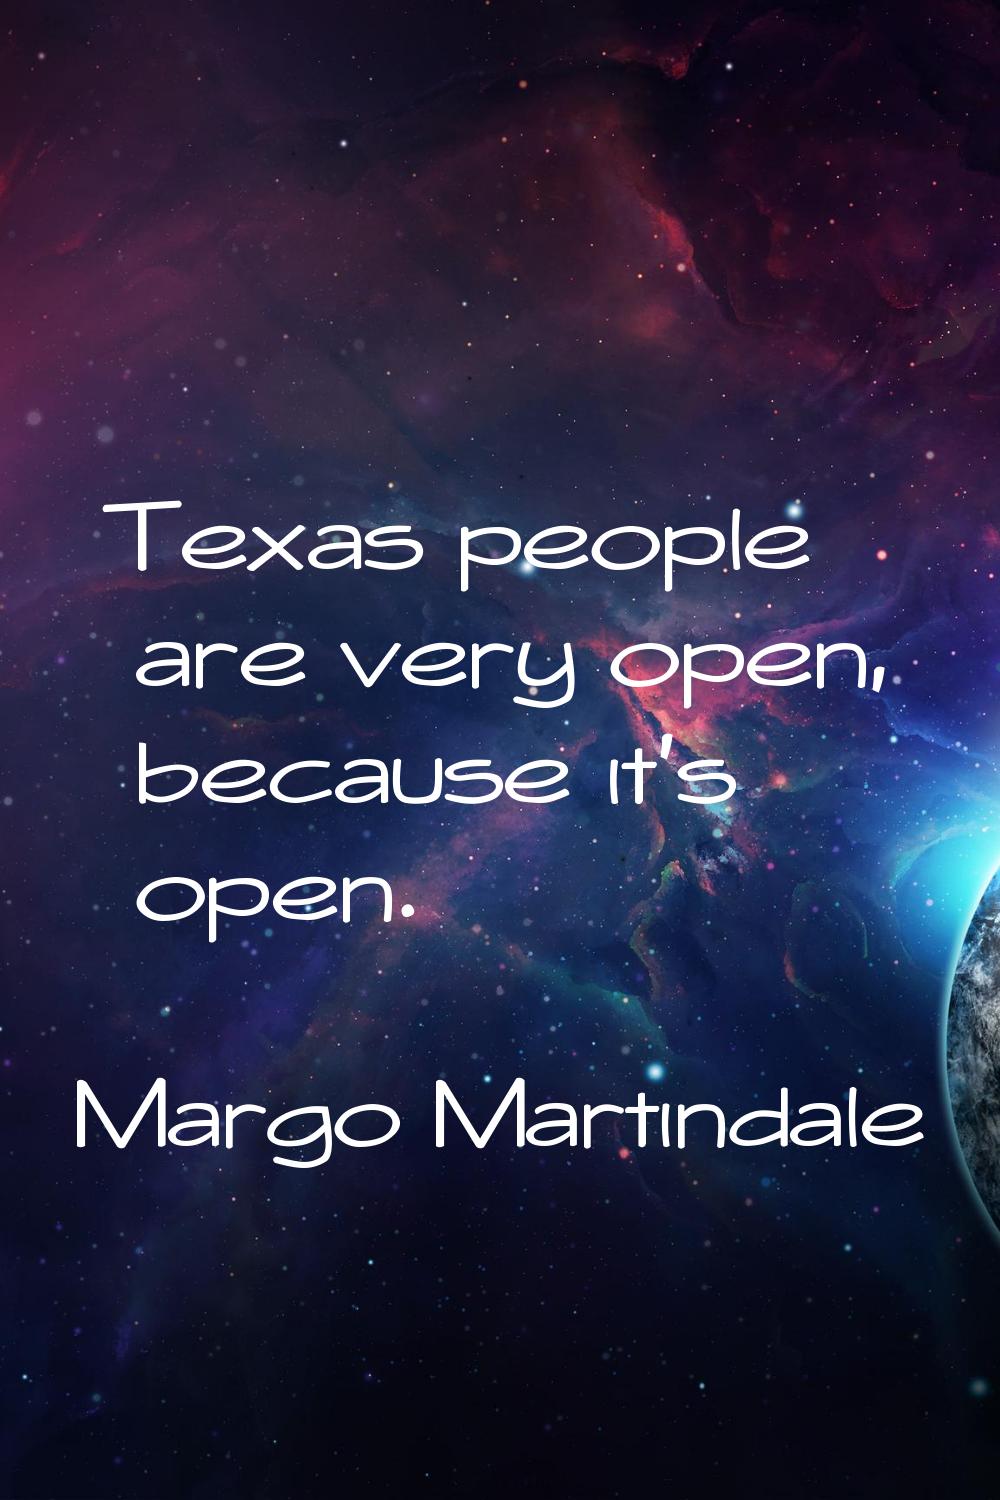 Texas people are very open, because it's open.